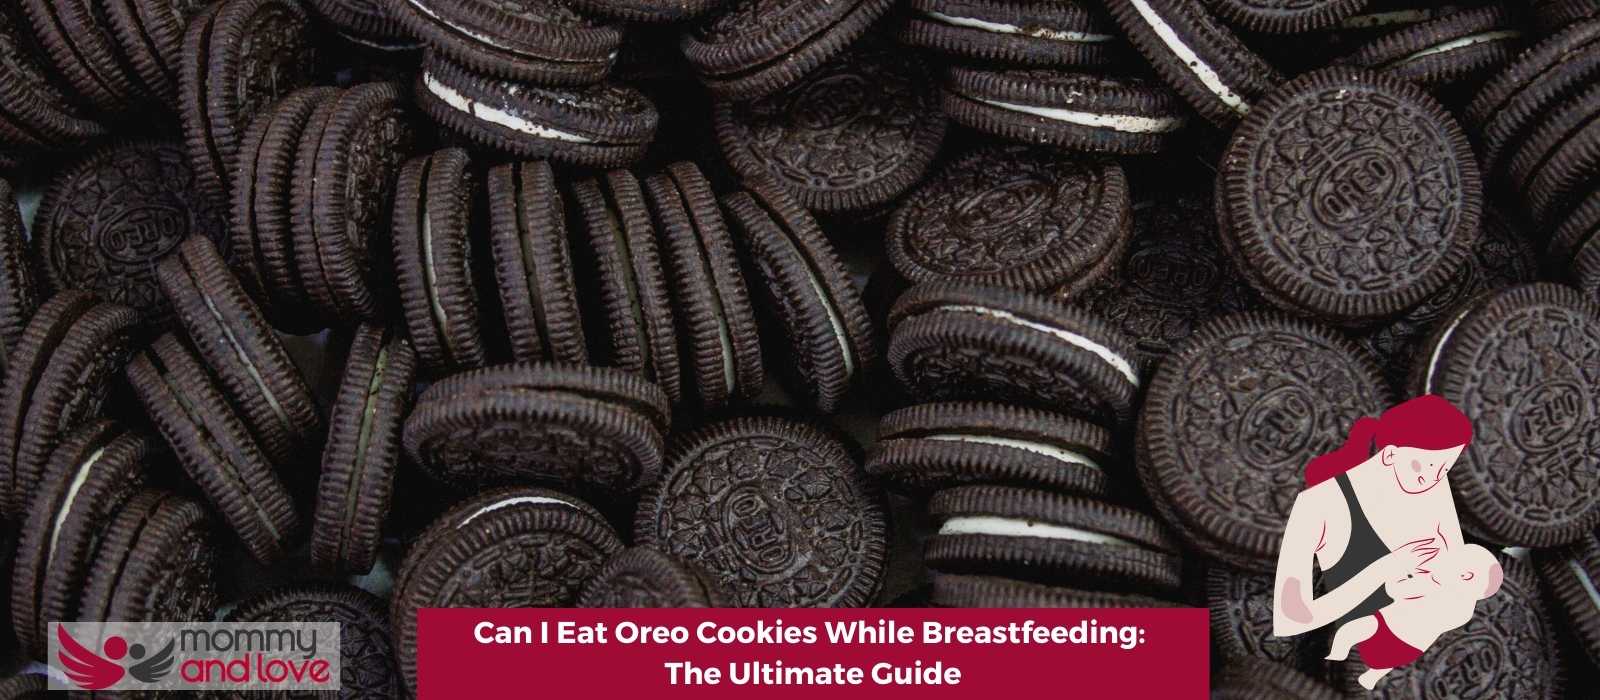 Can I Eat Oreo Cookies While Breastfeeding: The Ultimate Guide